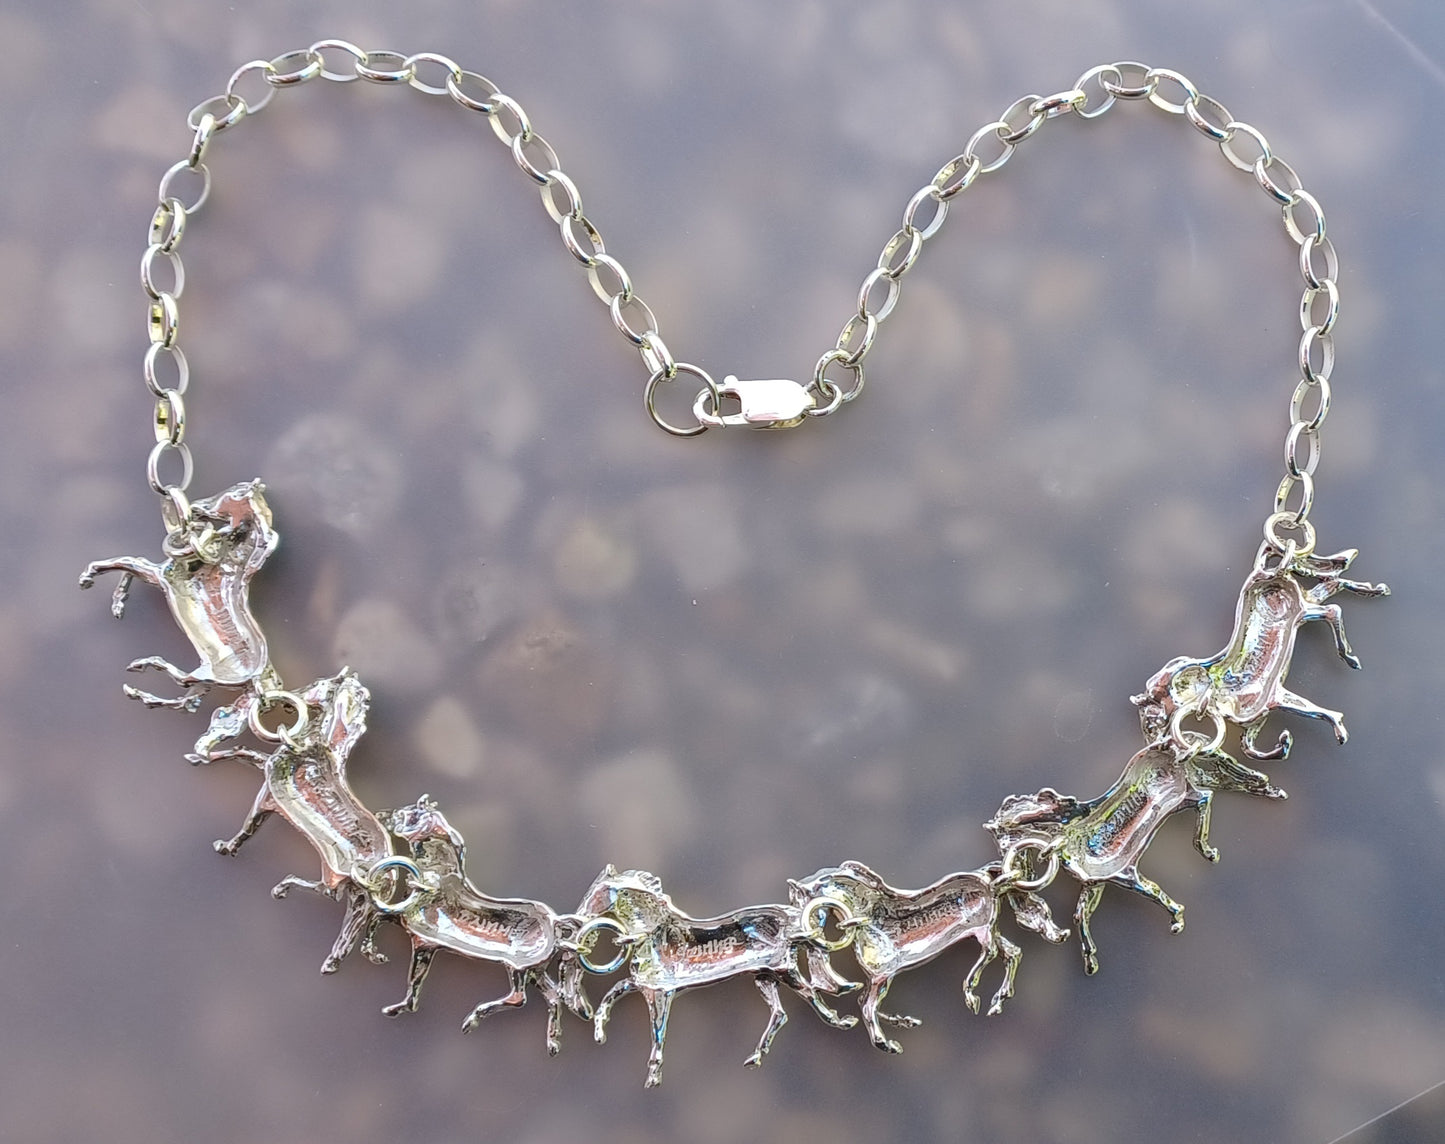 Impressive Horses Links Necklace with Heavy Sterling Silver Chain Artisan Masterpiece!